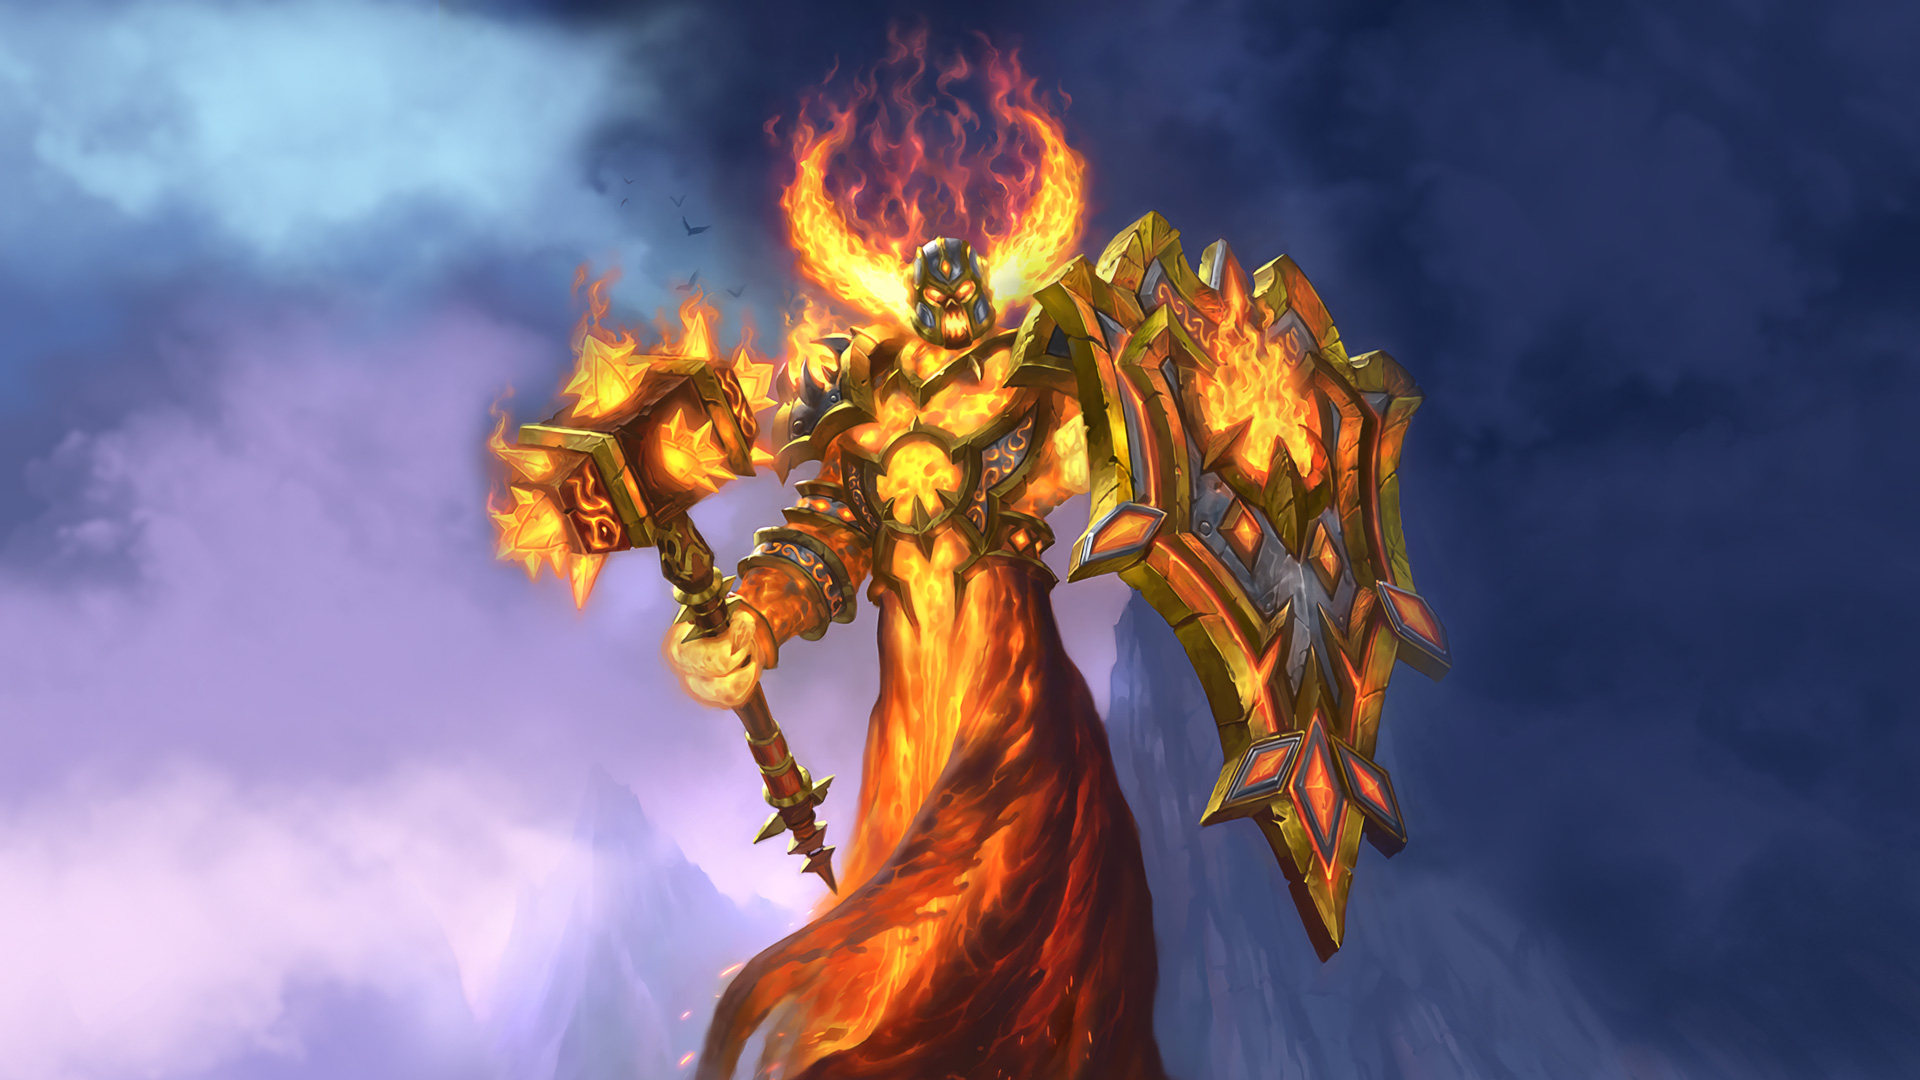 Whispers Of The Old Gods Hearthstone Wallpapers For Desktop And Images, Photos, Reviews